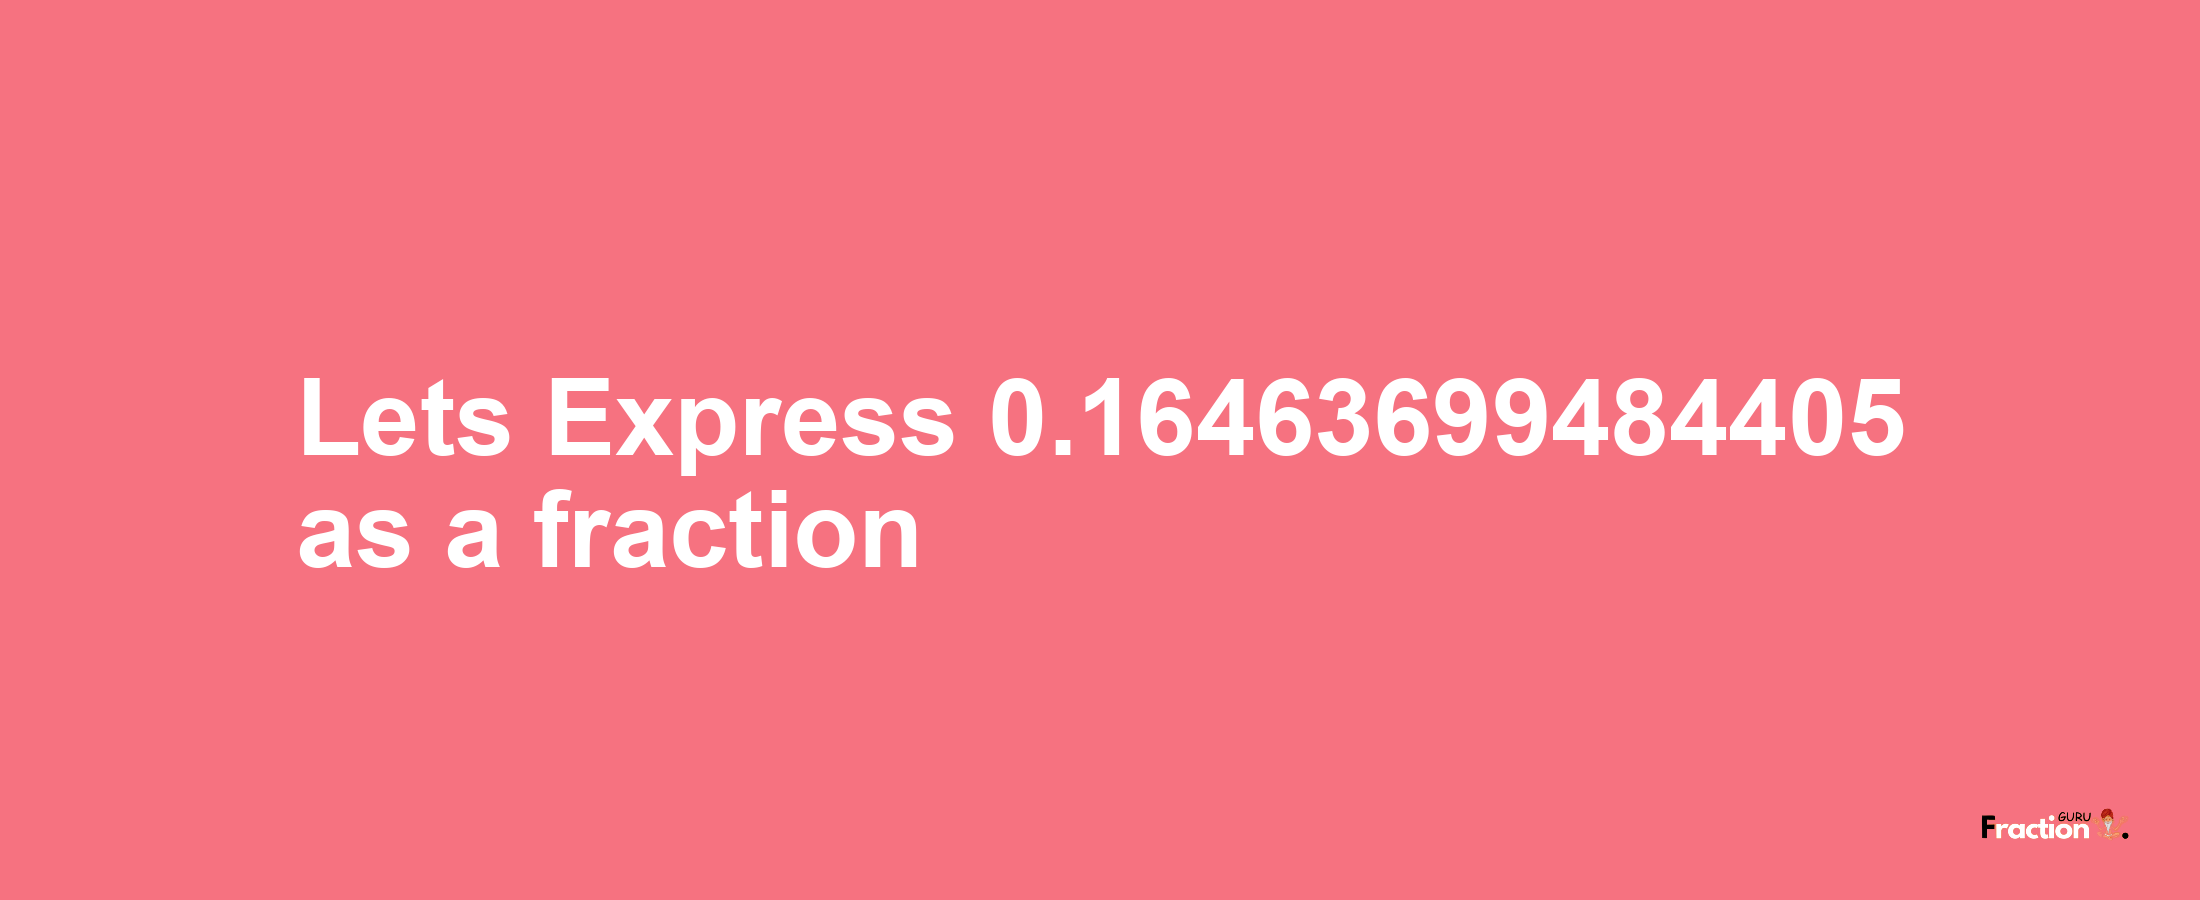 Lets Express 0.16463699484405 as afraction